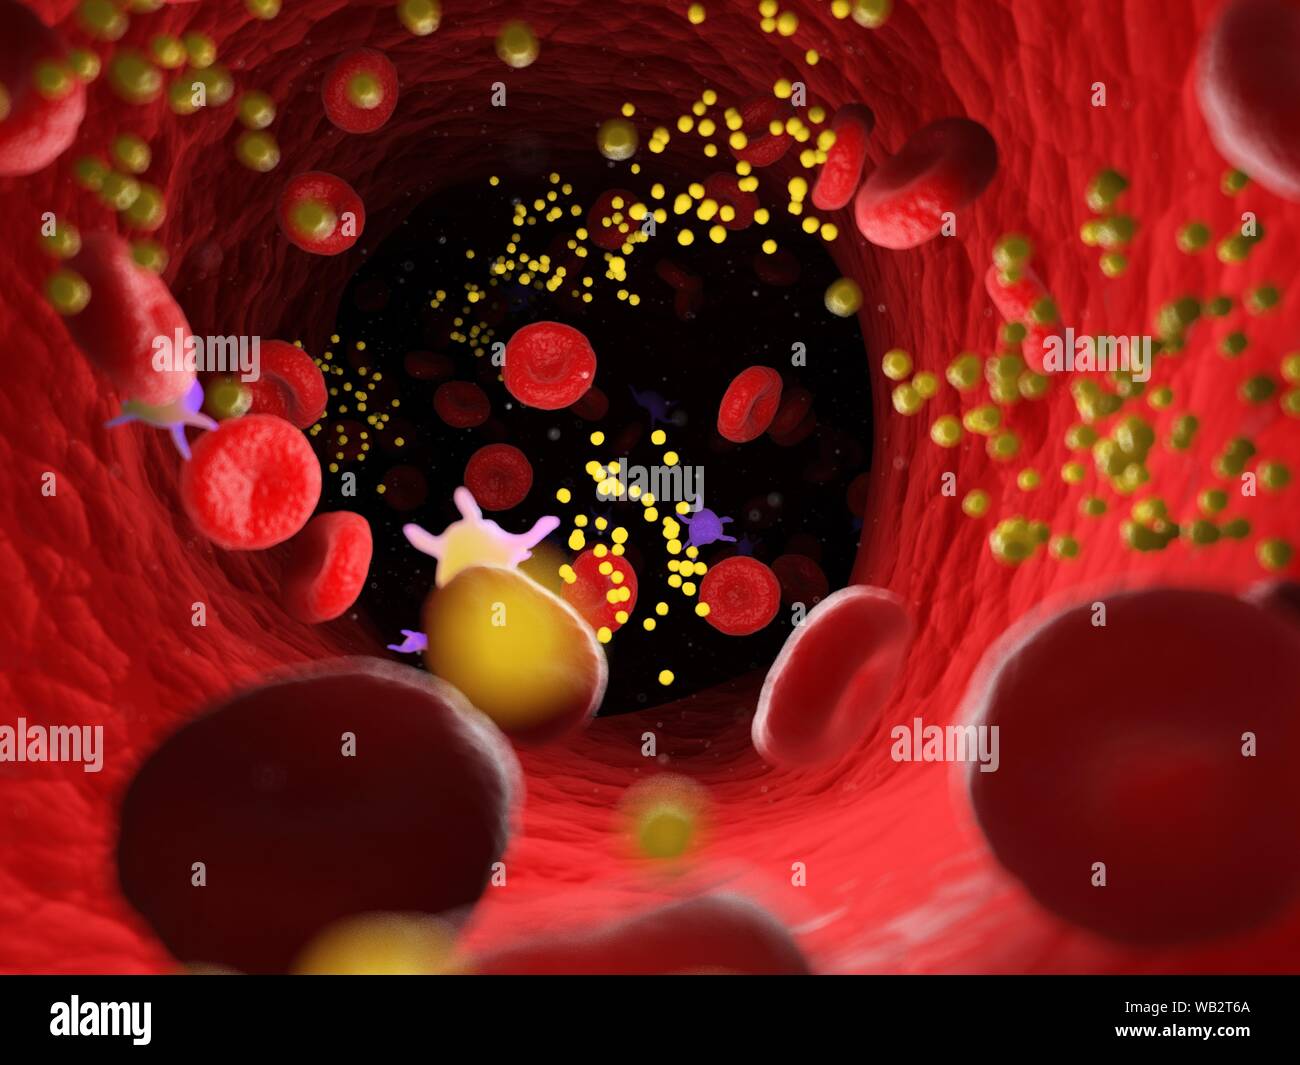 Fat in blood vessels, computer illustration. Stock Photo